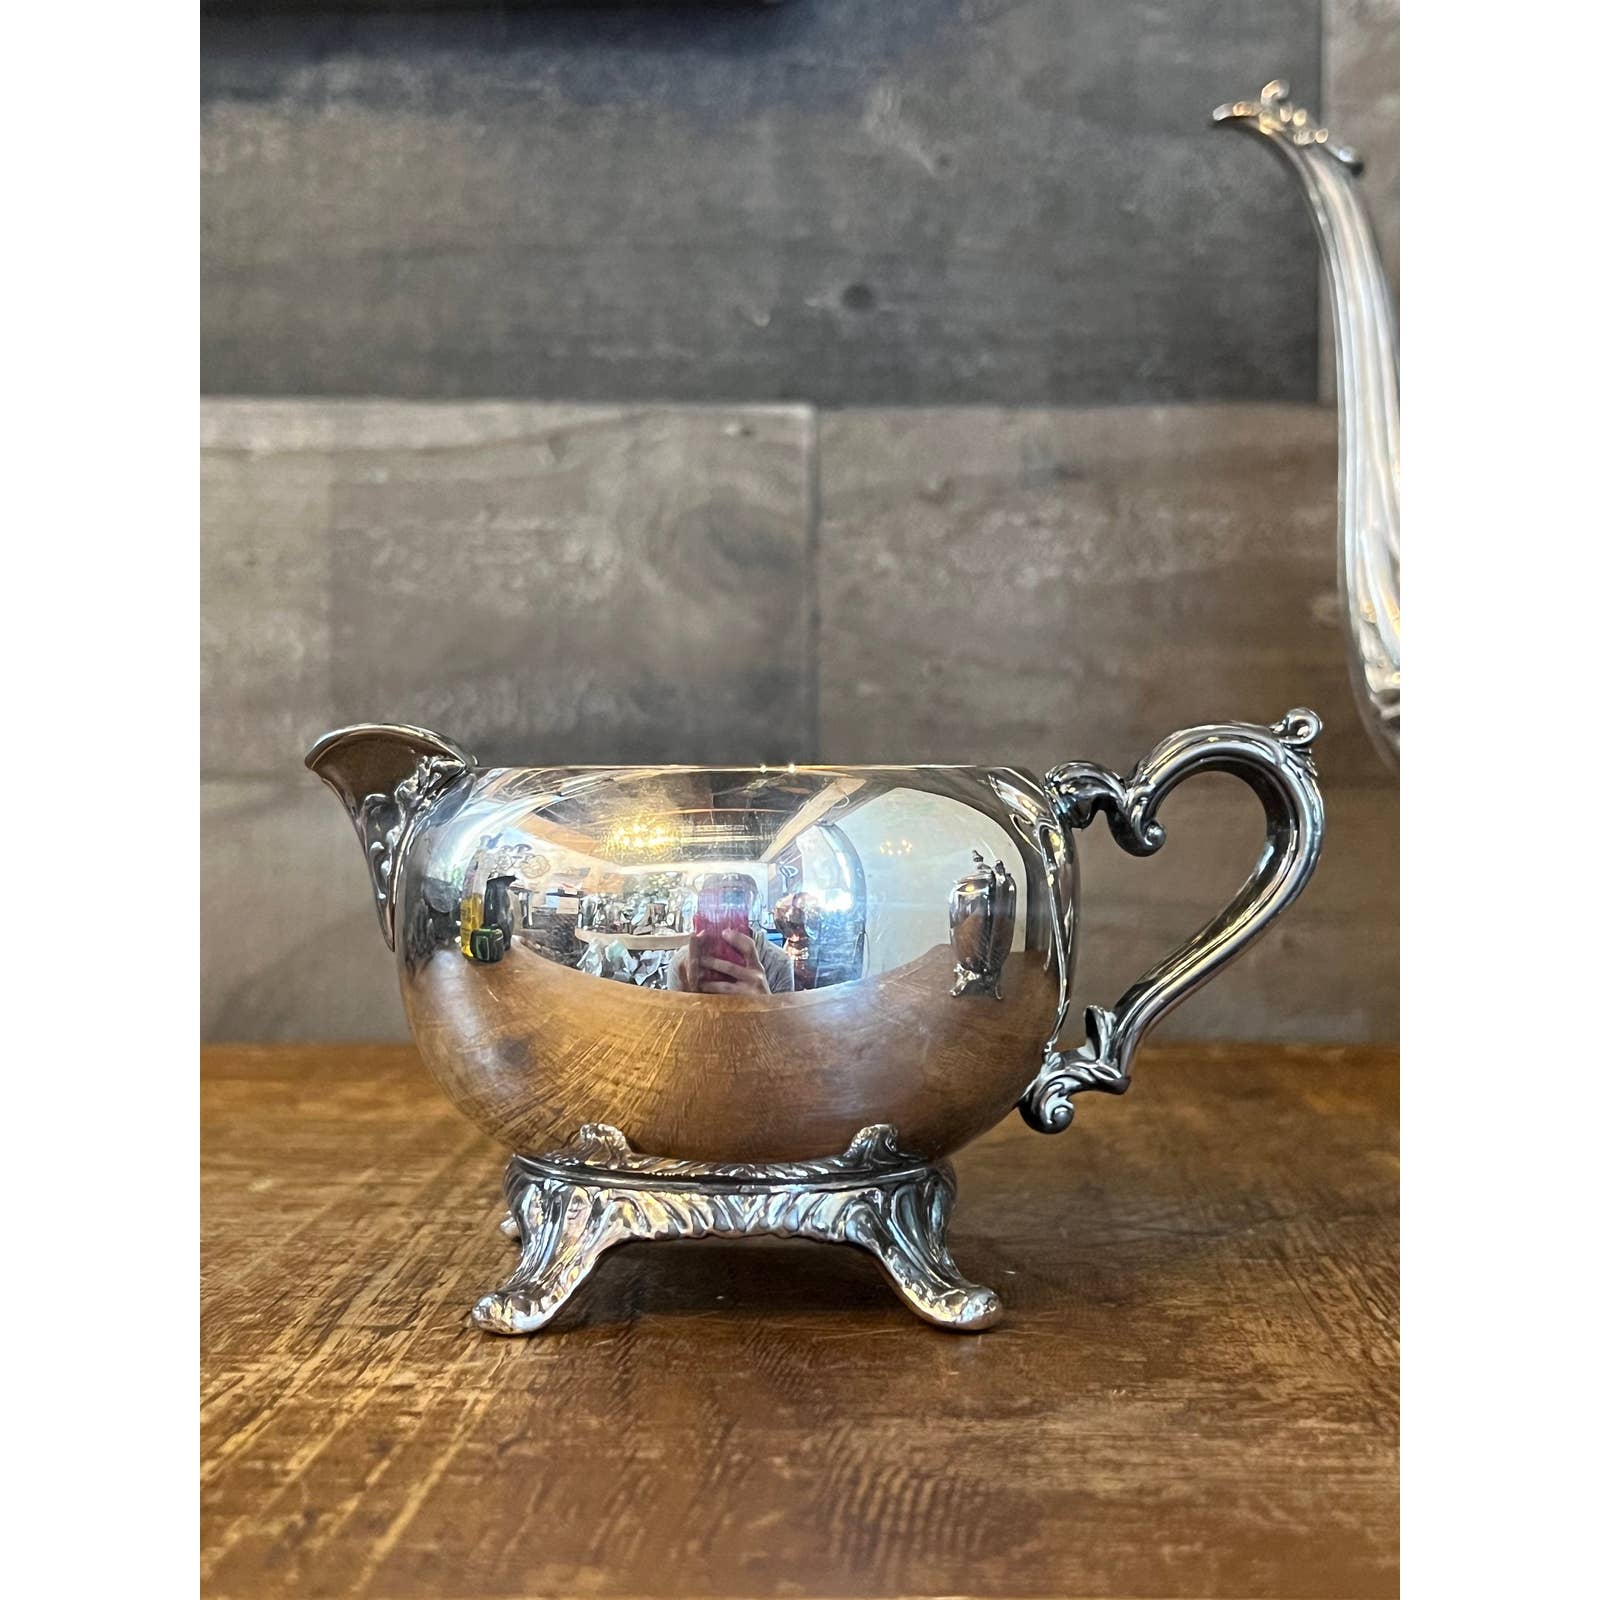 Vintage WM Rogers silver plated teapot, creamer and sugar - 1101